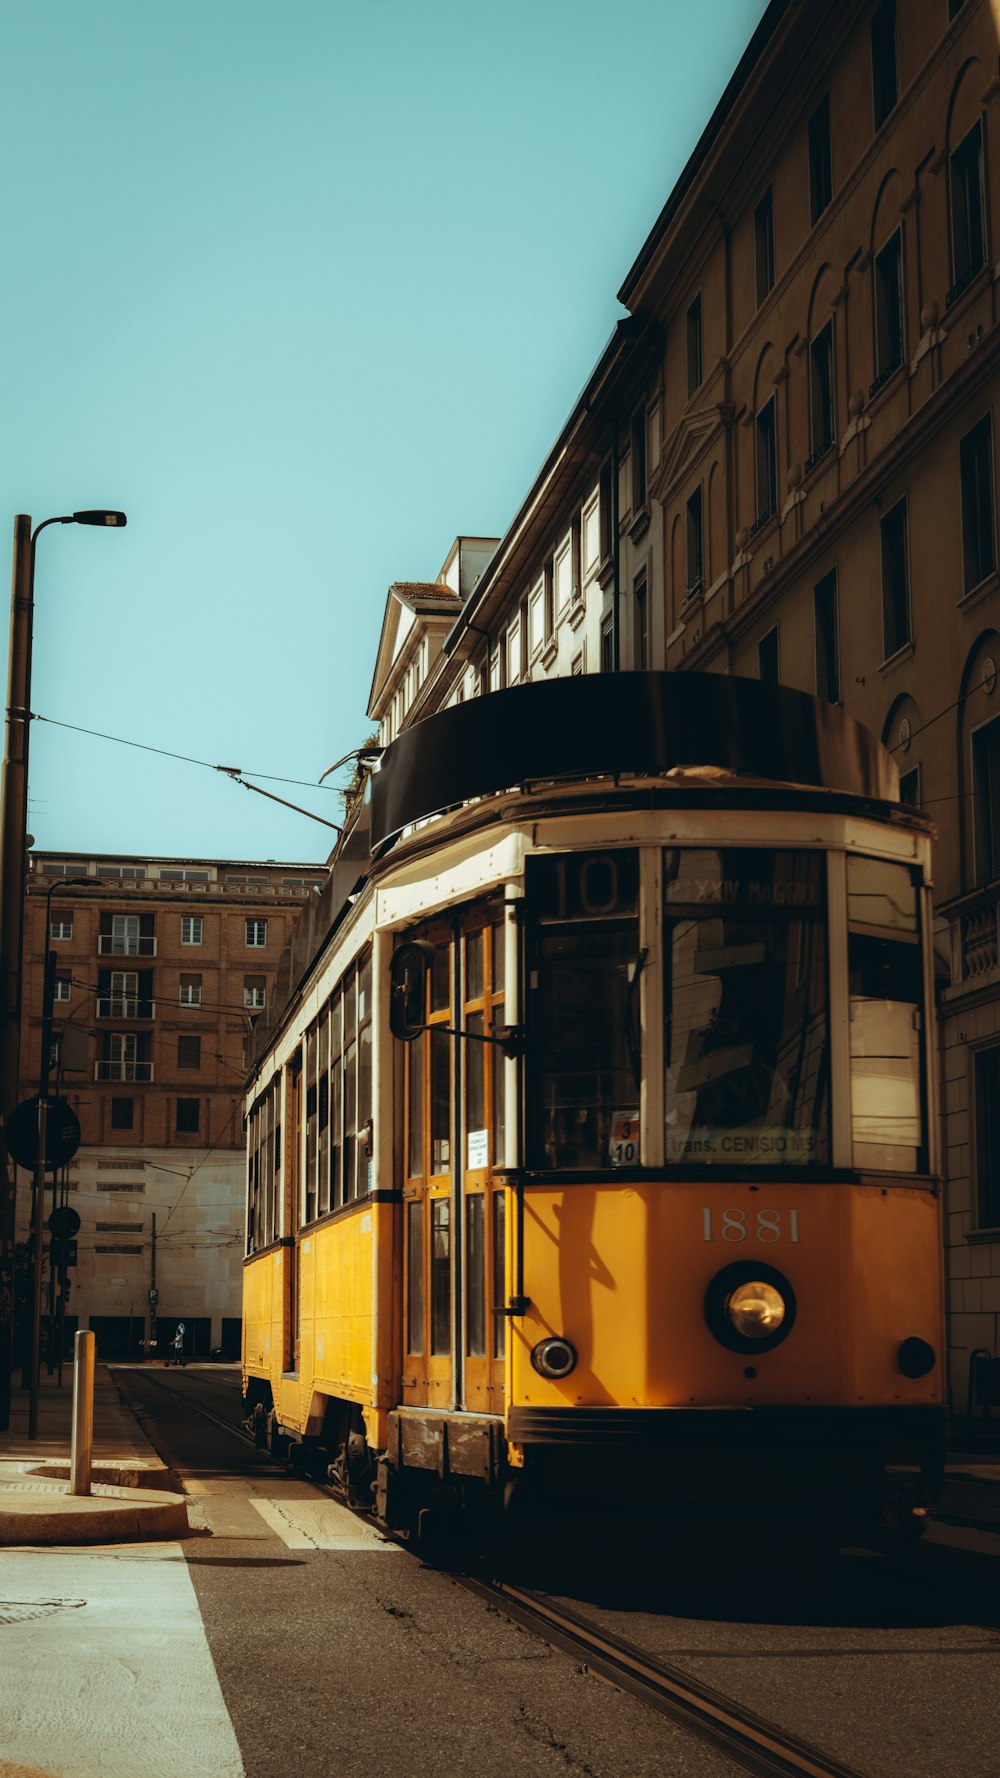 yellow and white tram in the city during daytime